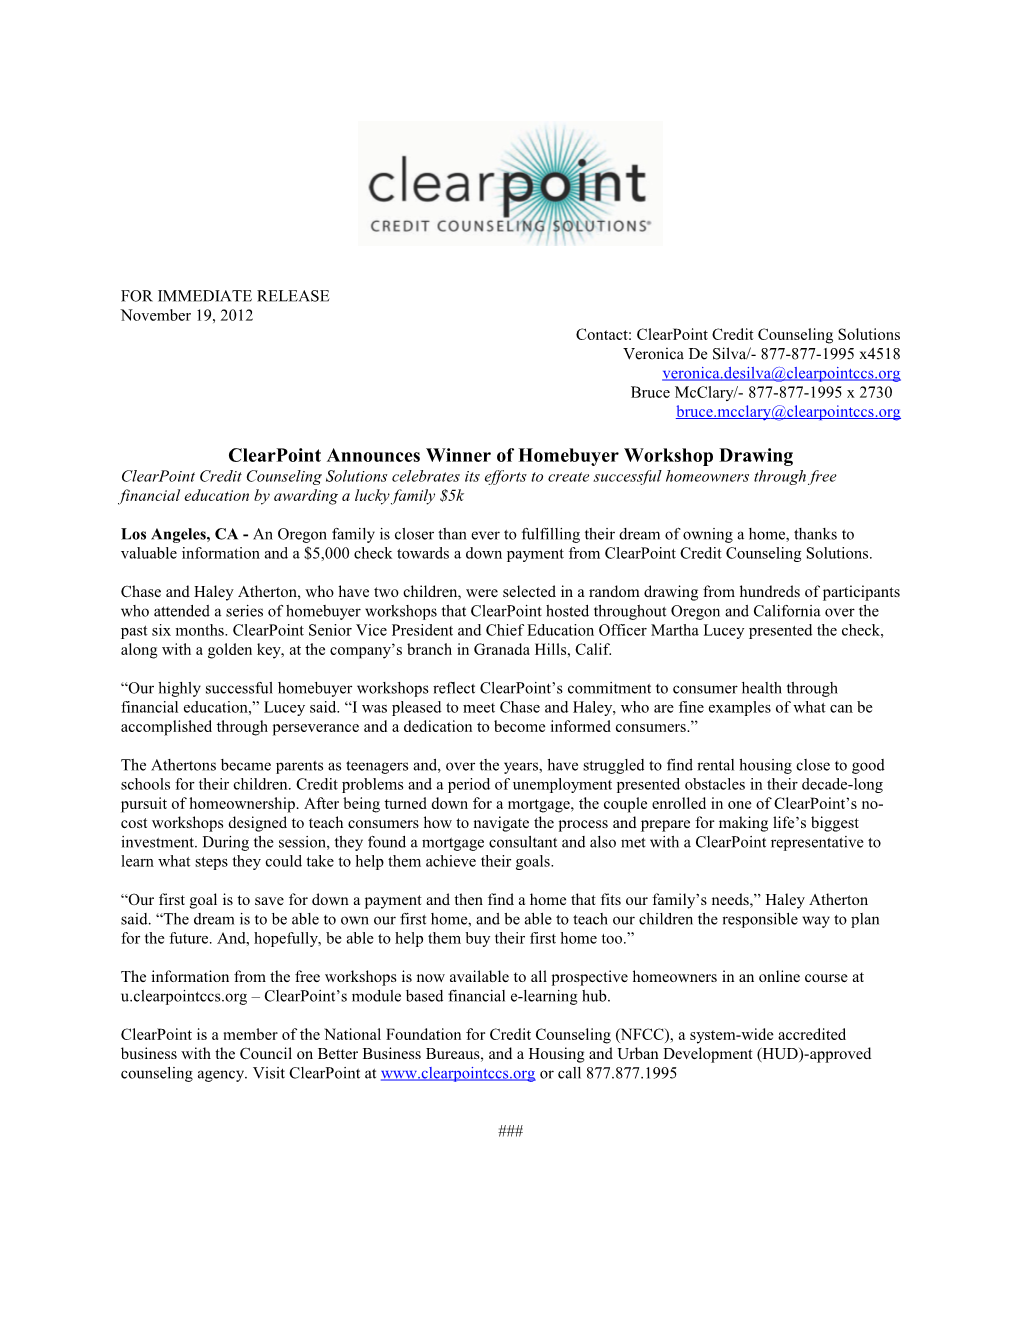 Contact: Clearpoint Credit Counseling Solutions